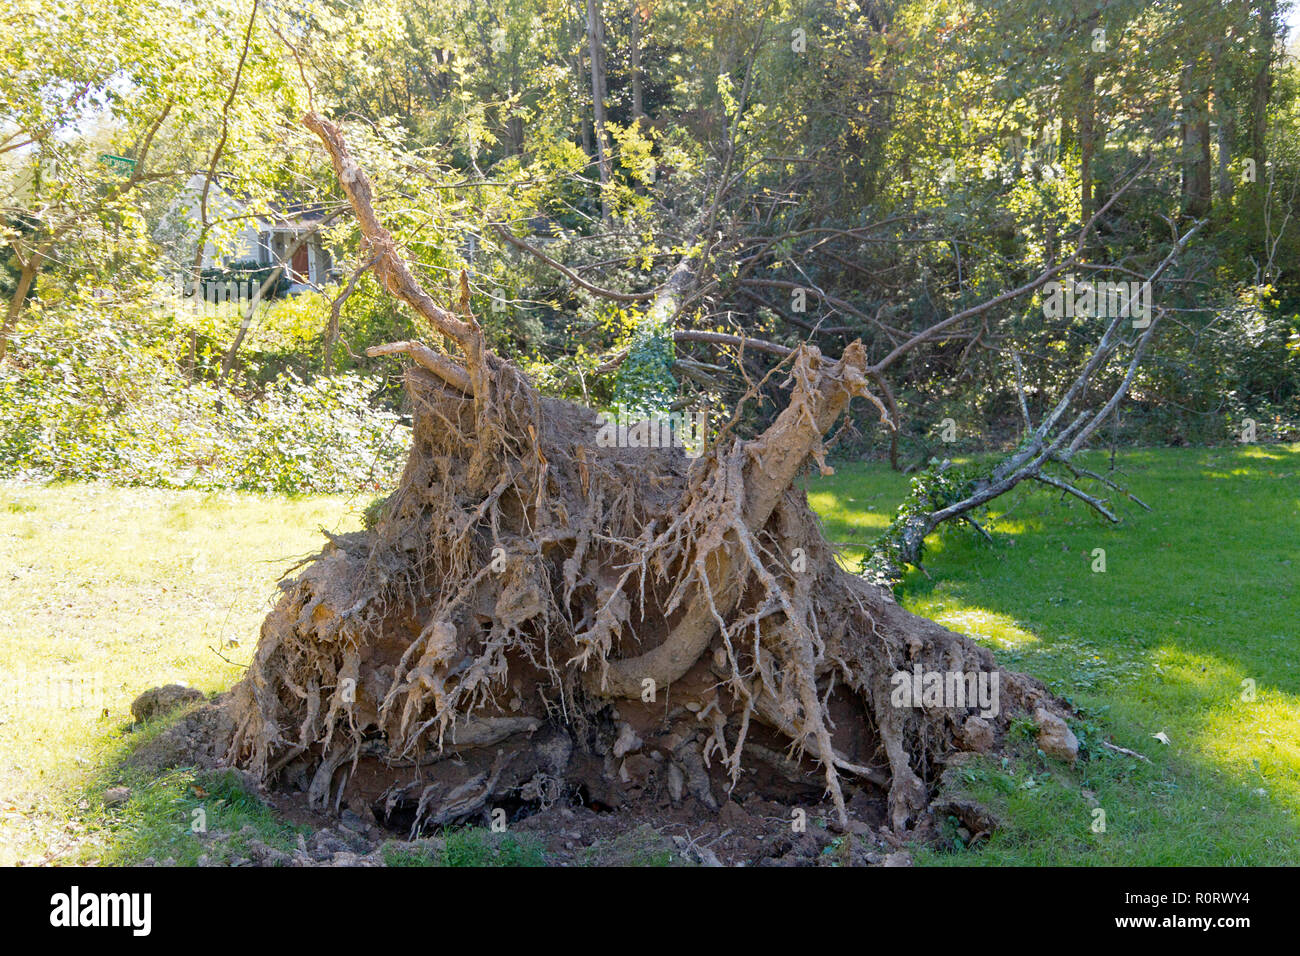 A pine tree knocked over by a windstorm lies on the grass with its root ball exposed Stock Photo